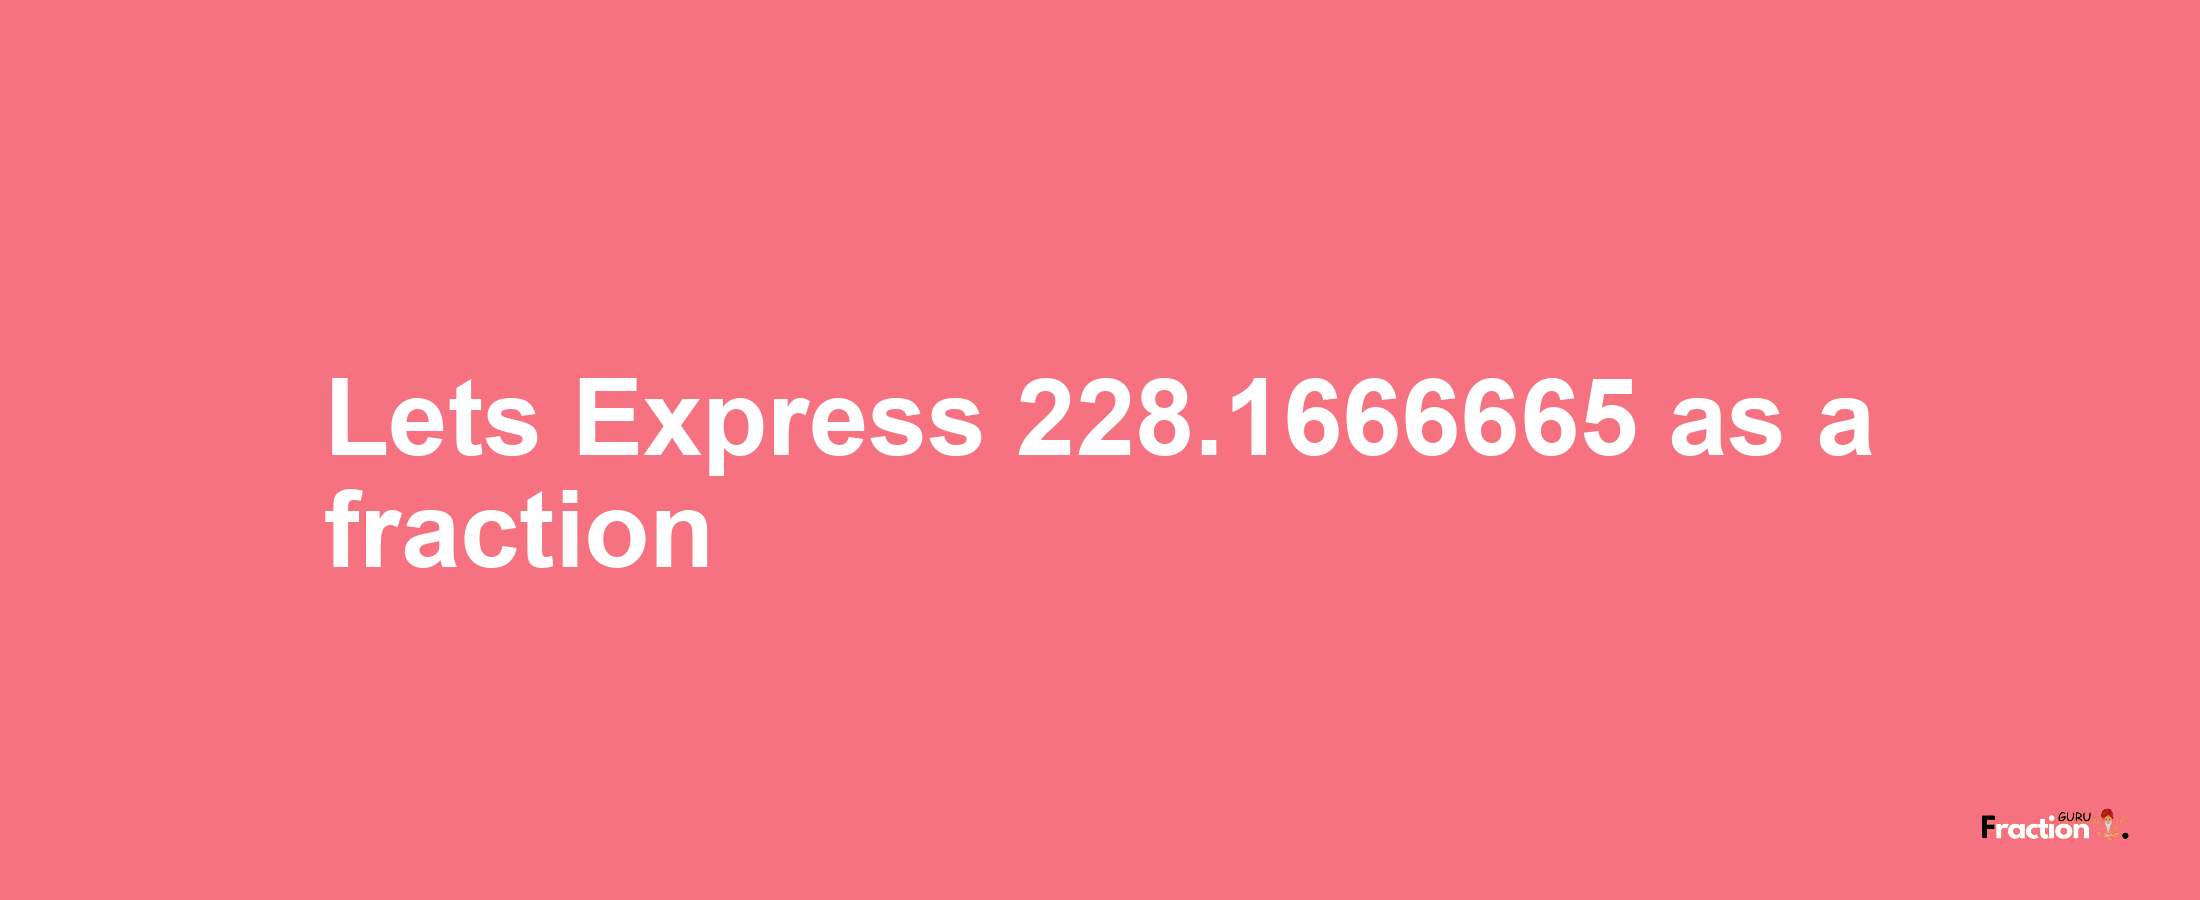 Lets Express 228.1666665 as afraction